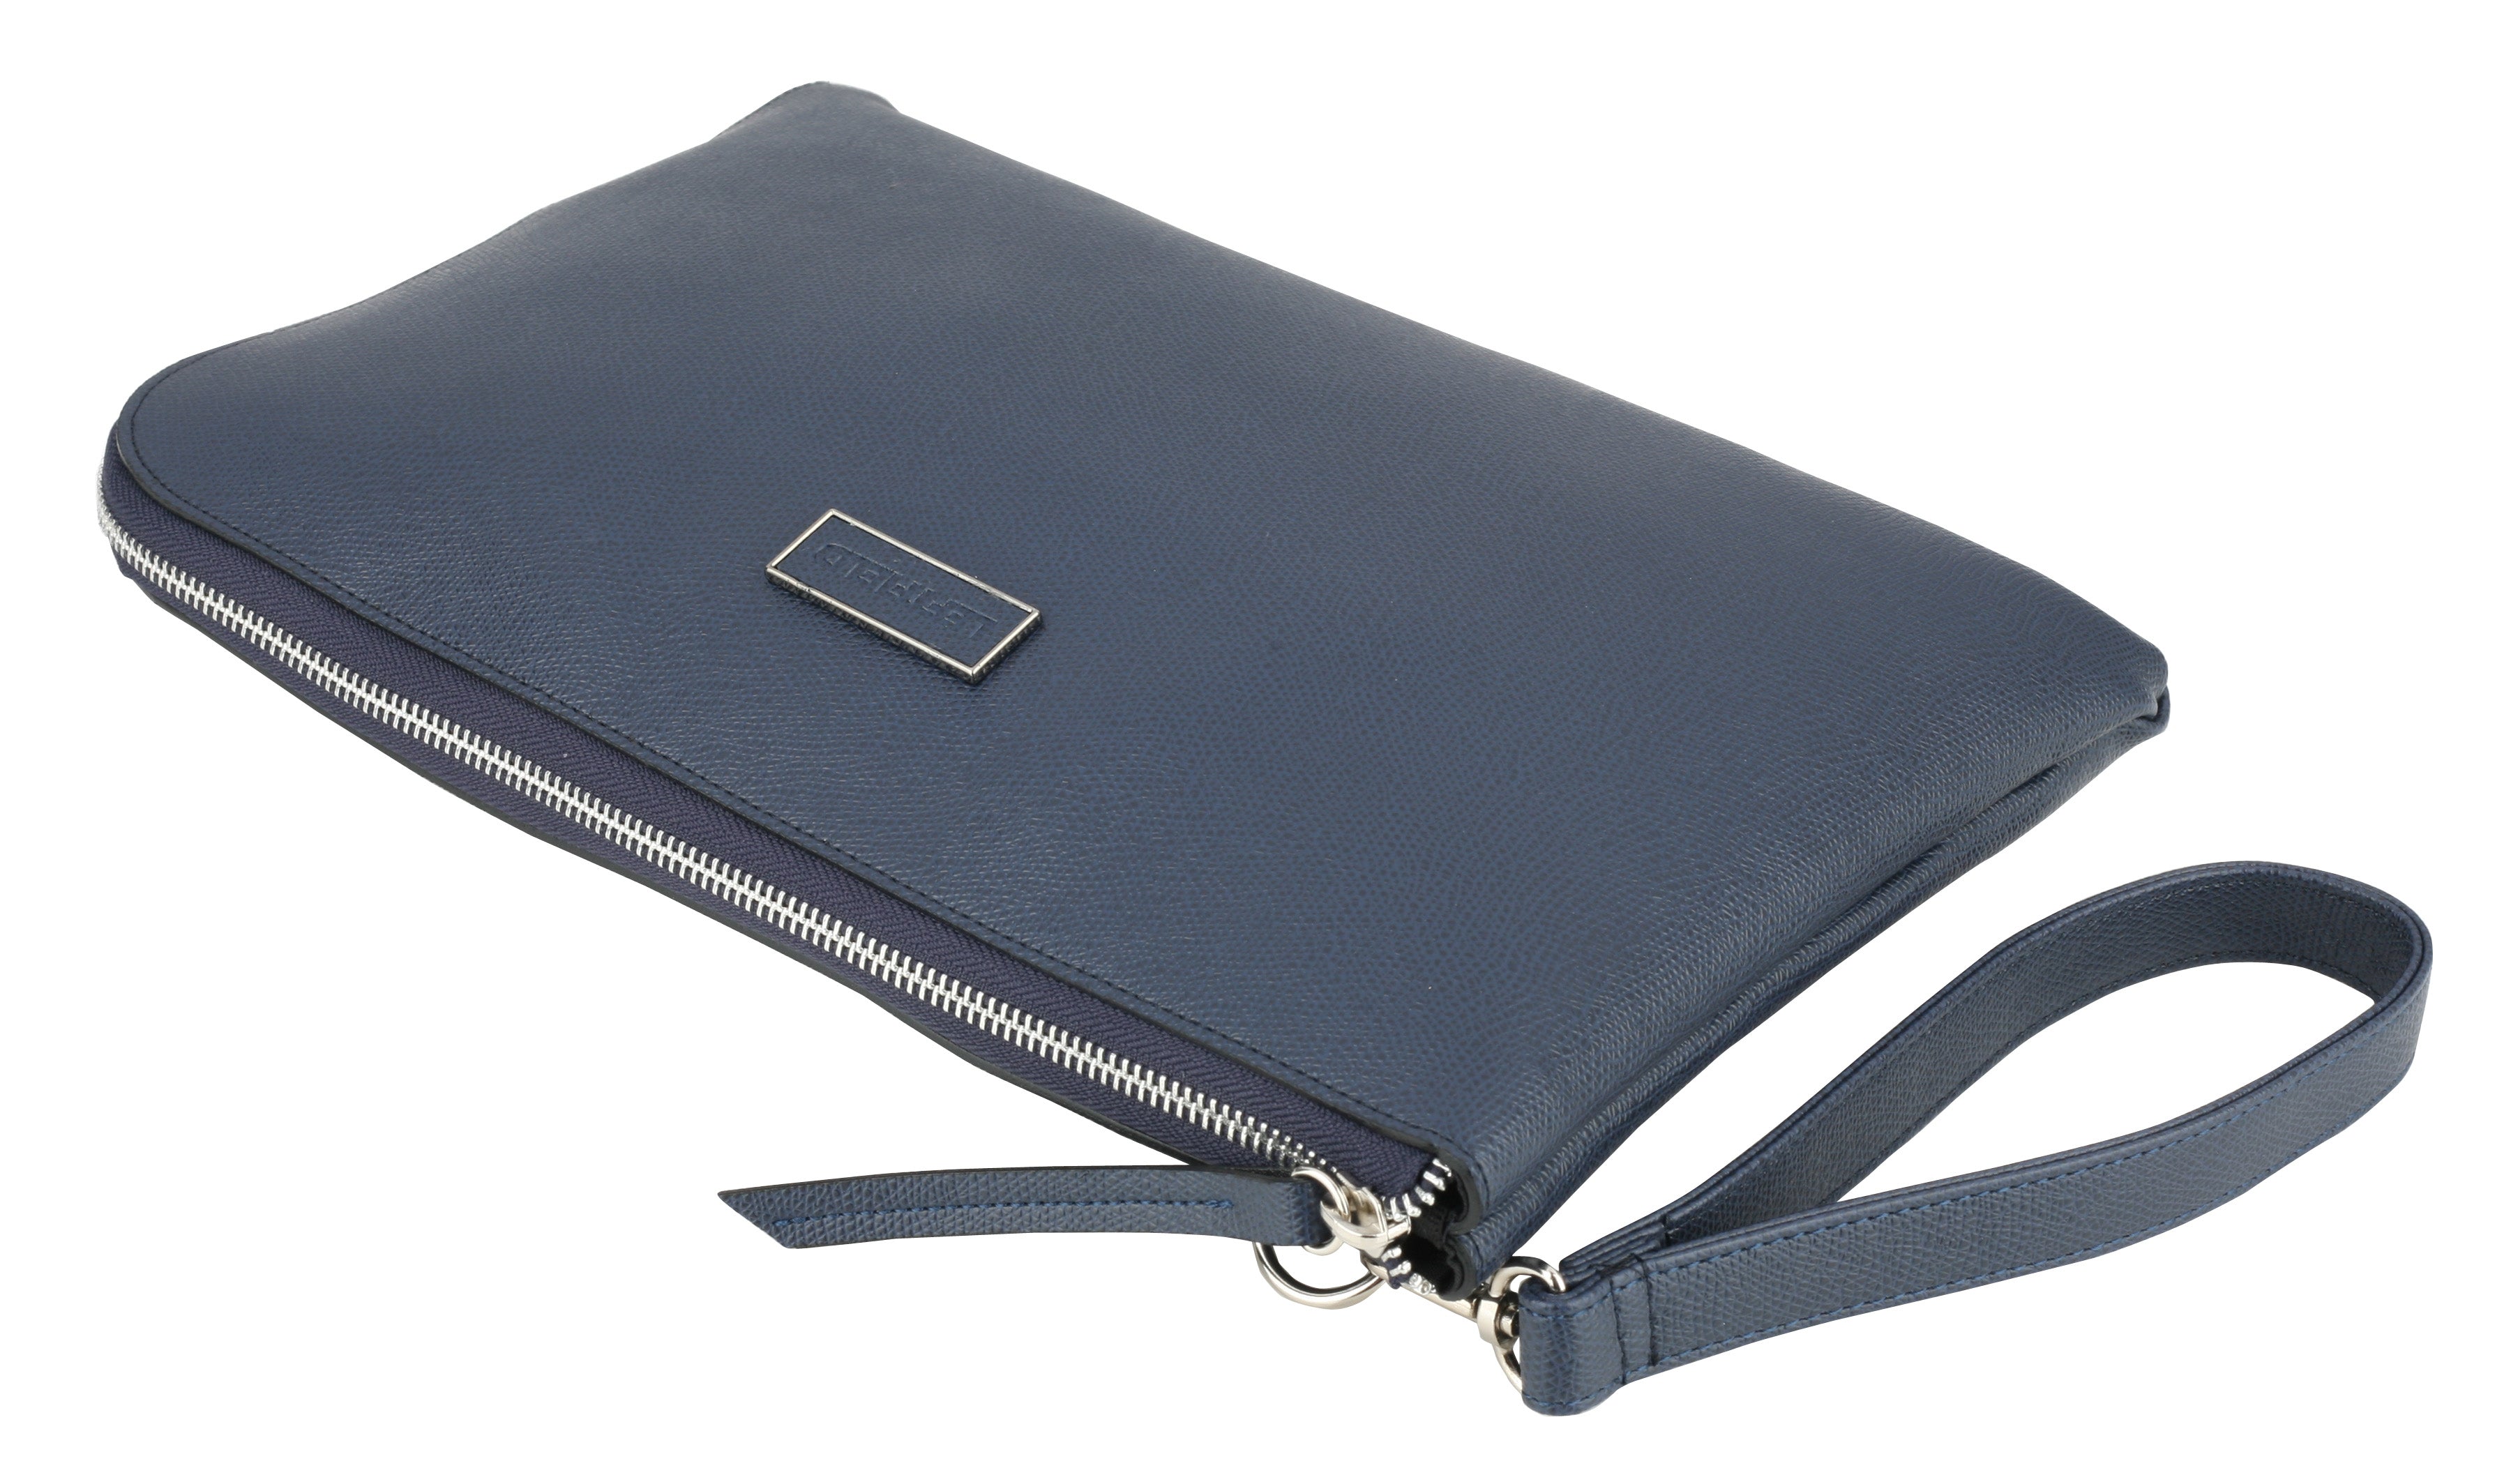 Navy Blue Faux Leather Business Clutch Handbags